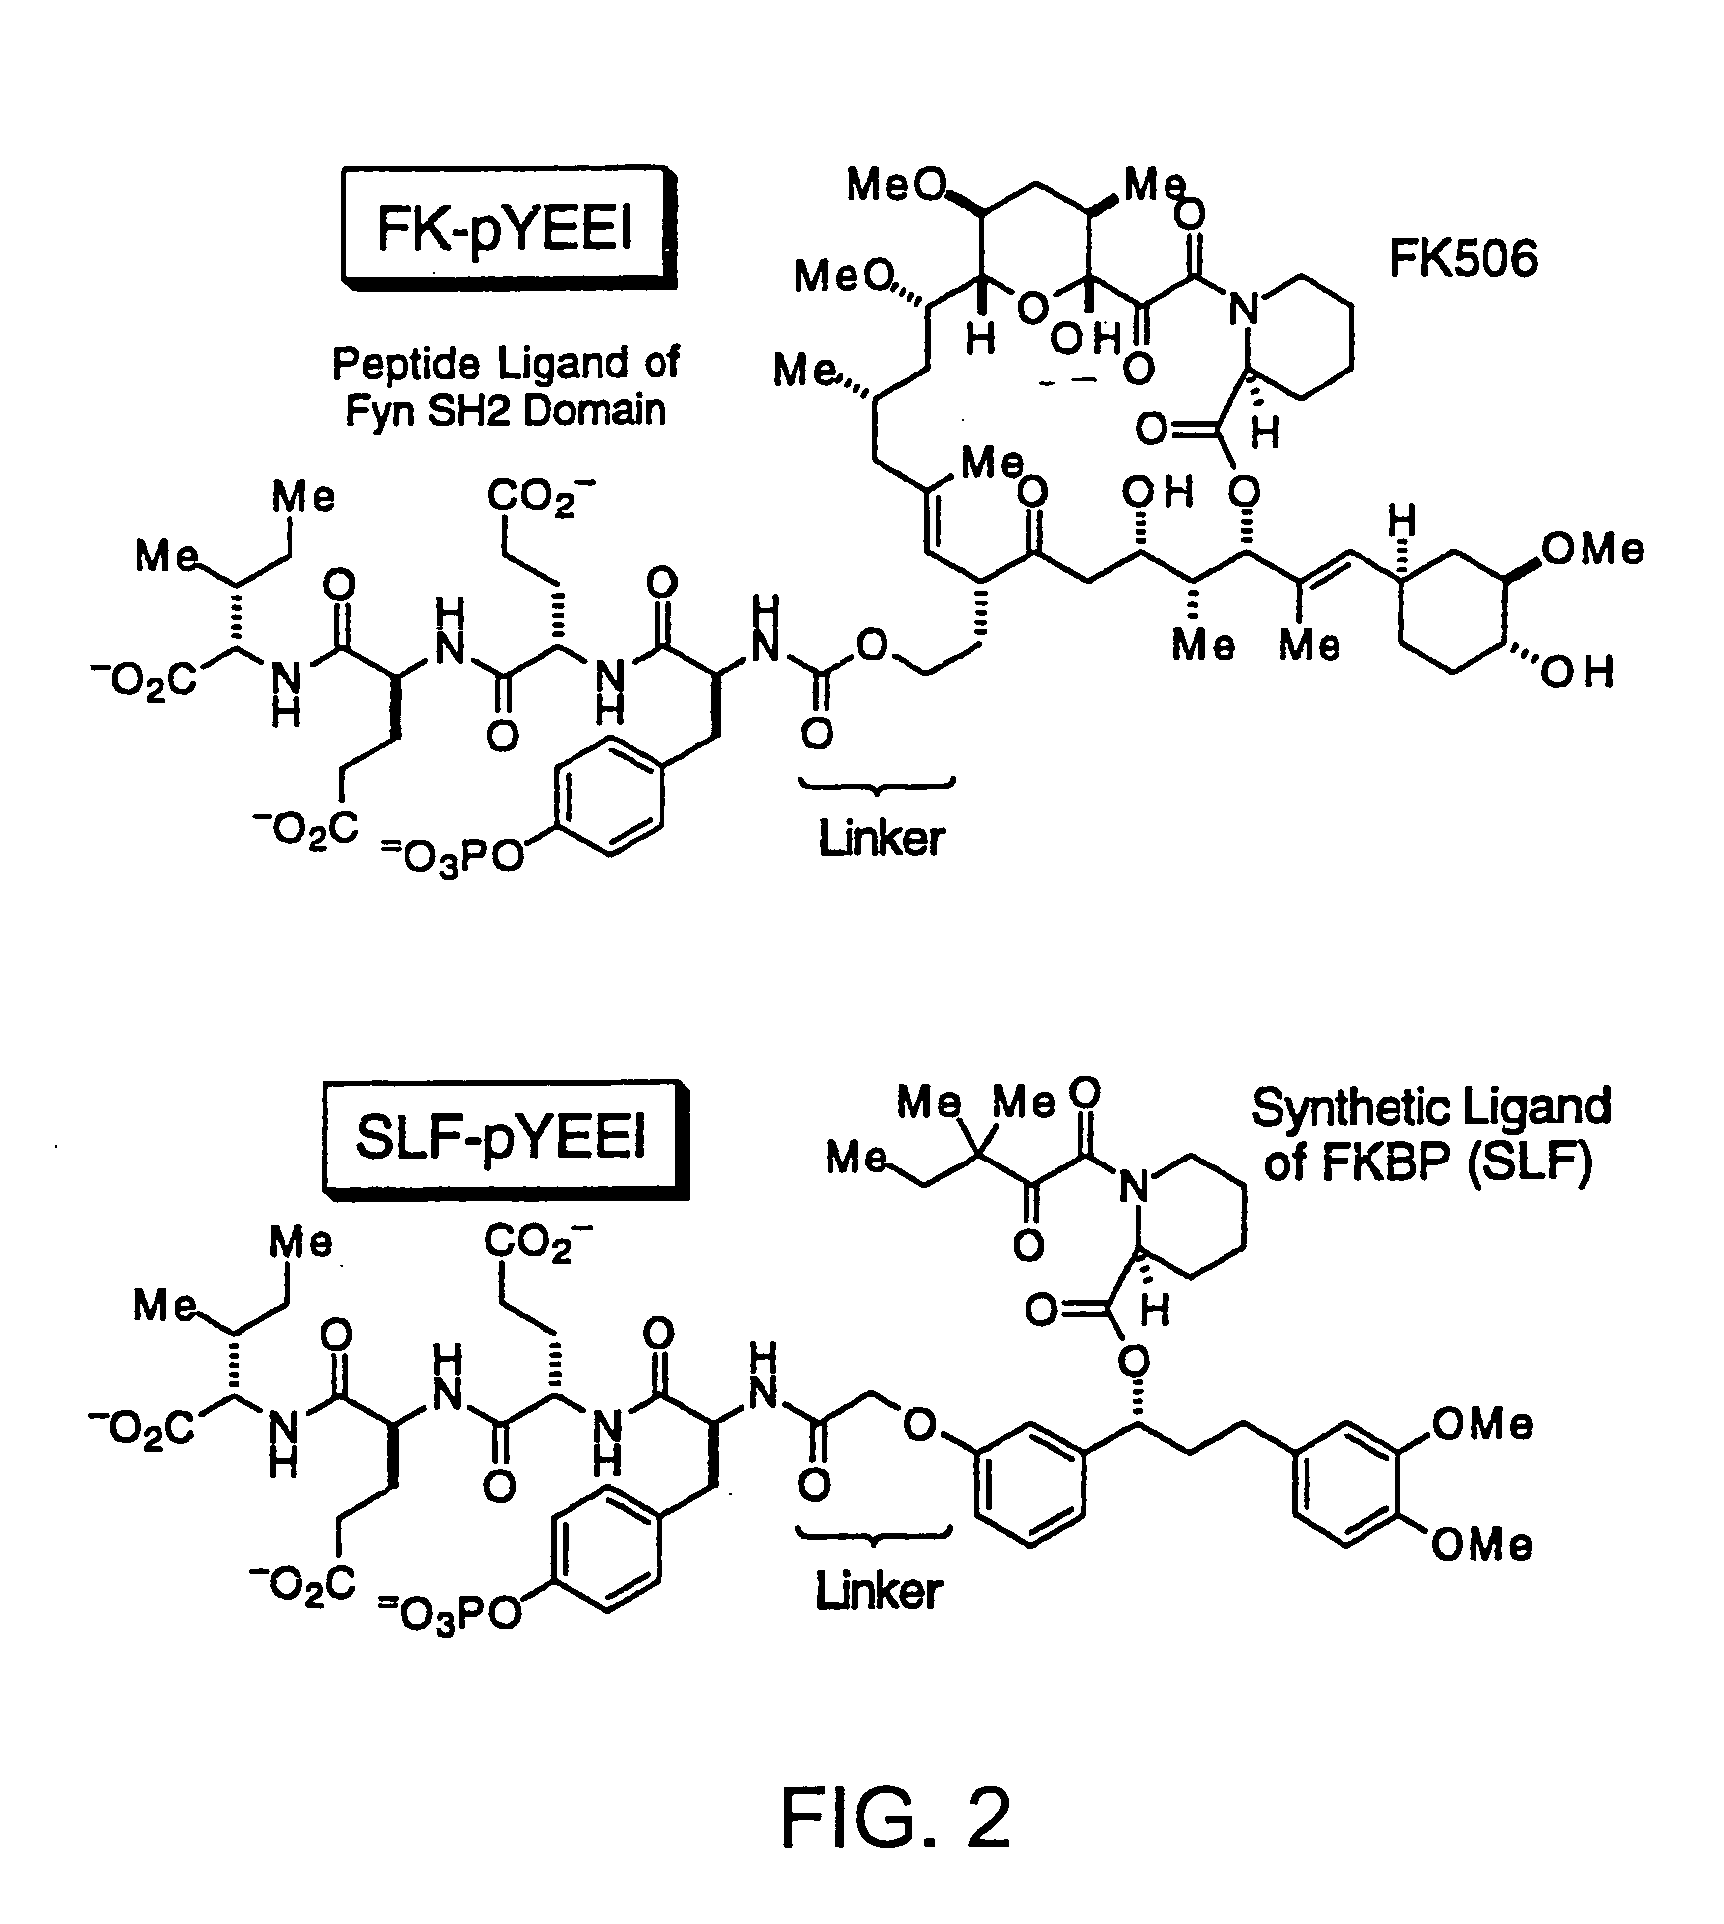 Administering bifunctional molecules containing a drug moiety and presenter protein ligand for therapy